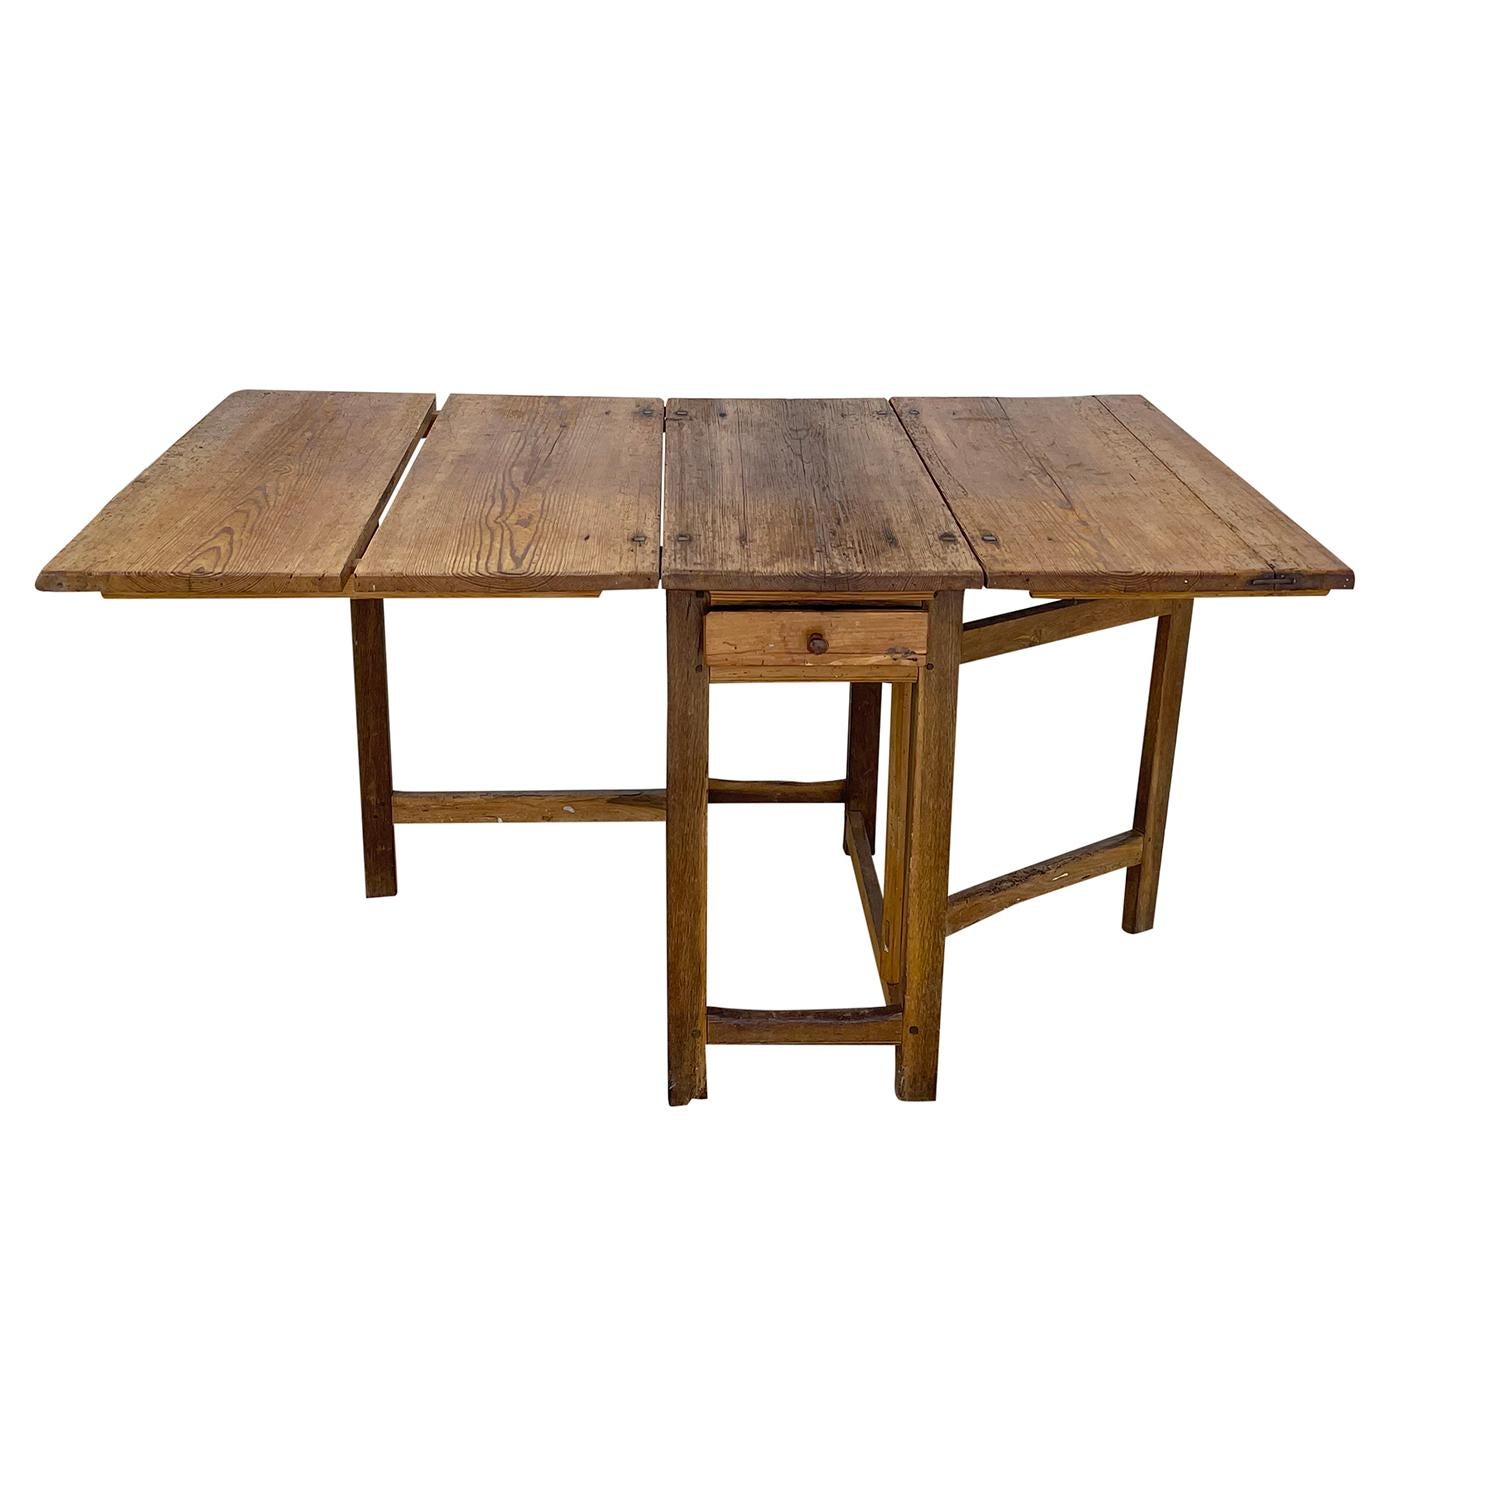 An antique Swedish Gustavian farmhouse table made of hand crafted Walnut with one drawer, in good condition. The Scandinavian rustic kitchen table is composed with two drop-leaves, the hinges are made of hand crafted wrought iron, supported by a